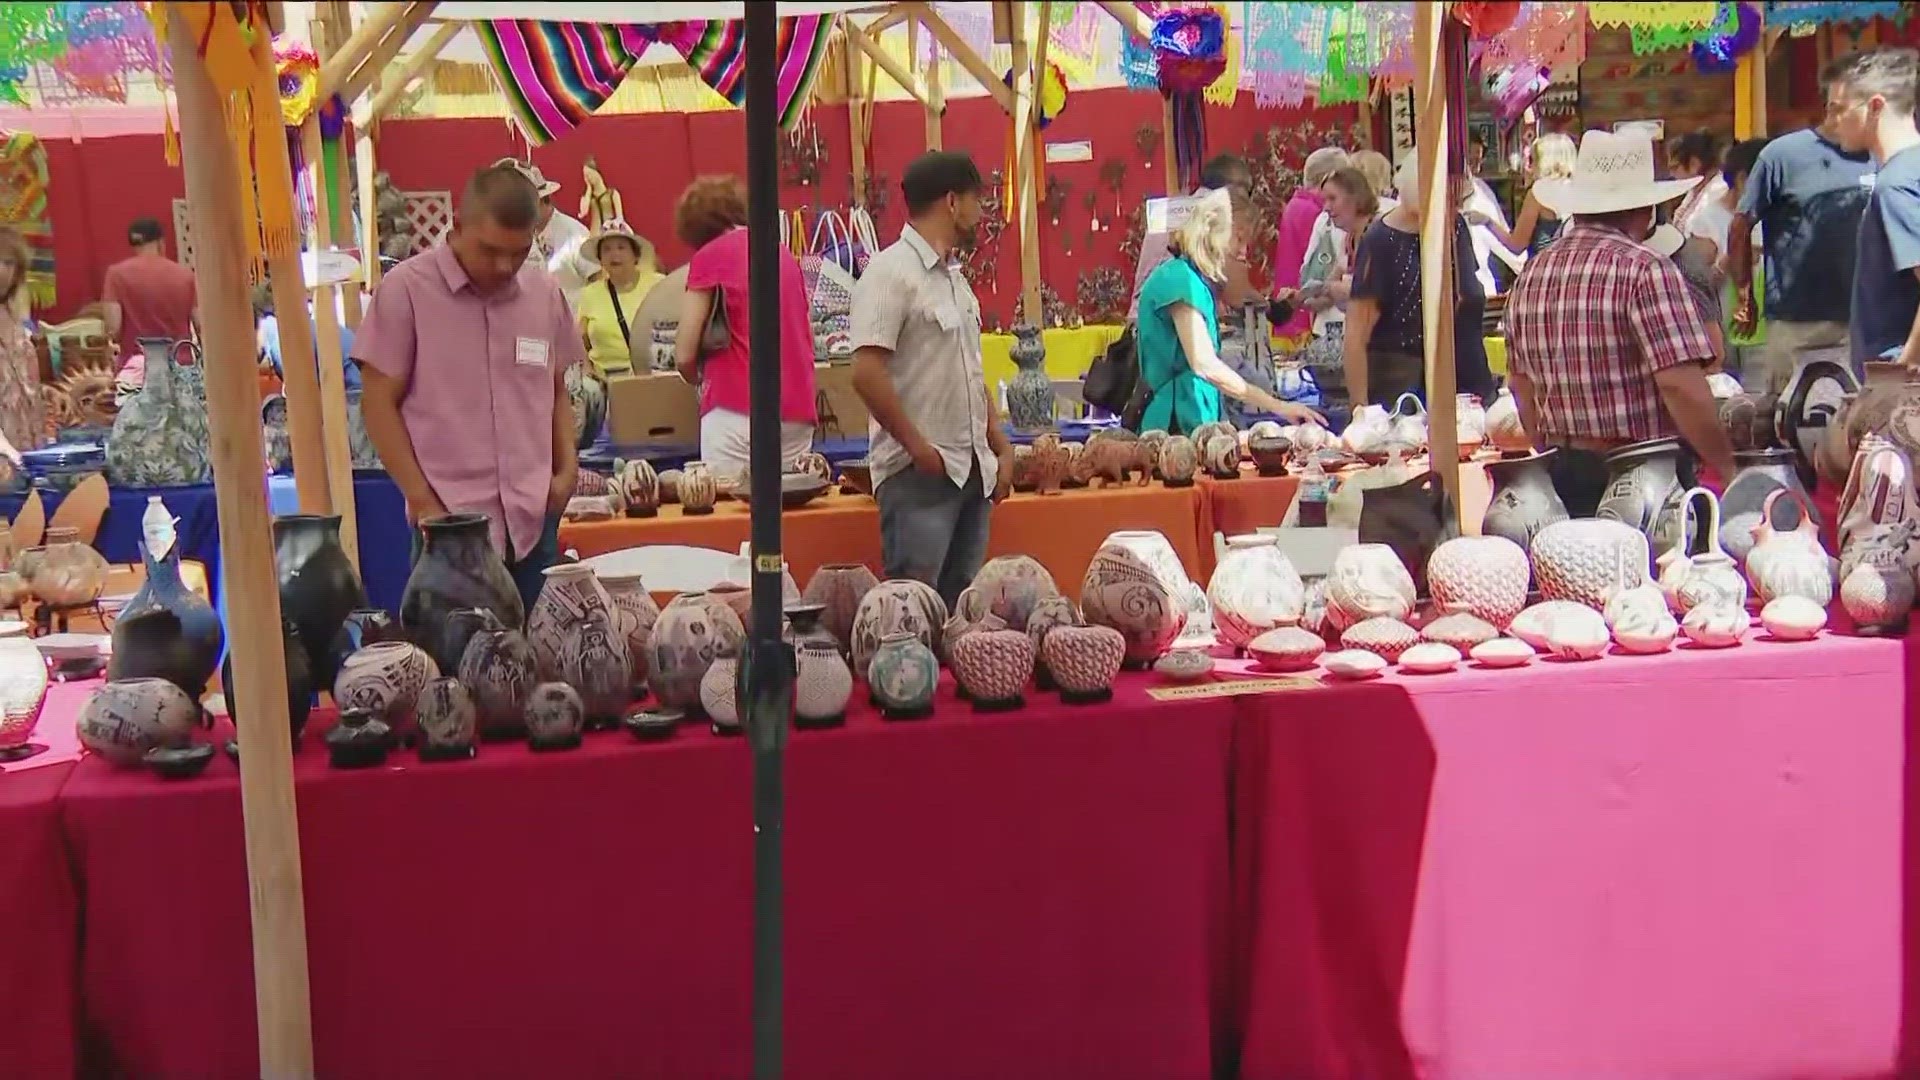 Folk art, crafts entertainment and more can be found at Bazaar del Mundo's Latin American Festival and Mata Ortiz Pottery Market in Old Town Aug. 4-6.